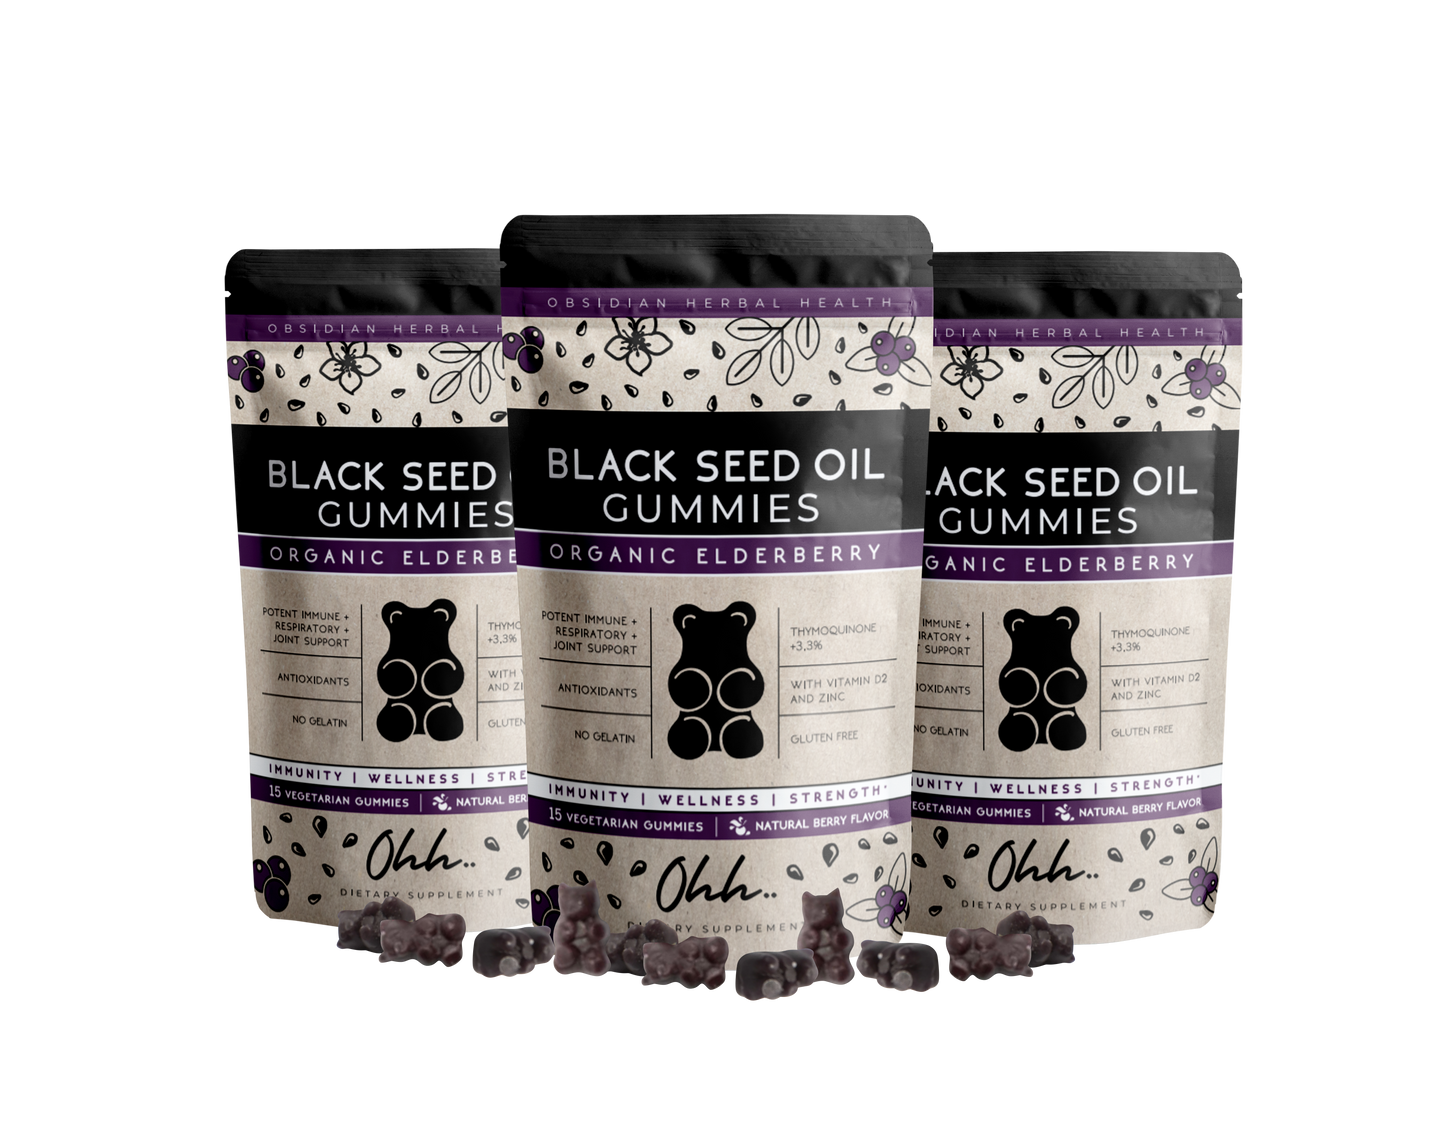 Organic black seed oil gummies on the go: gummy bears packed with Ethiopian black seed oil, thymoquinone, vitamin D, and zinc